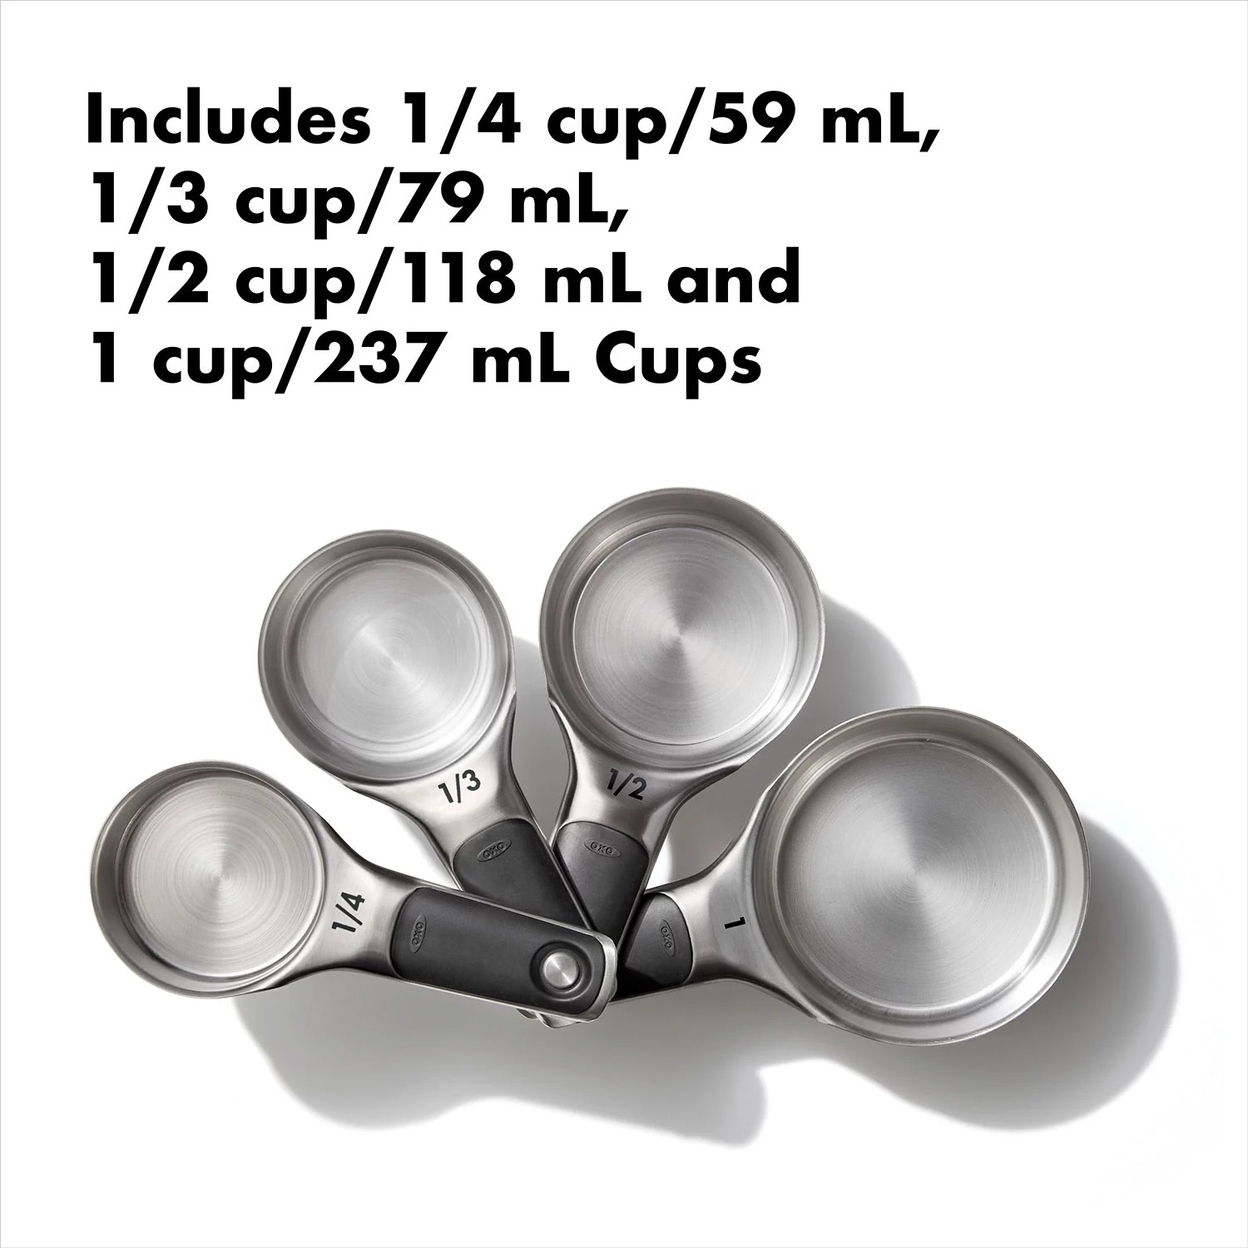 OXO 8-Piece Stainless Steel Measuring Cups And Spoons Set